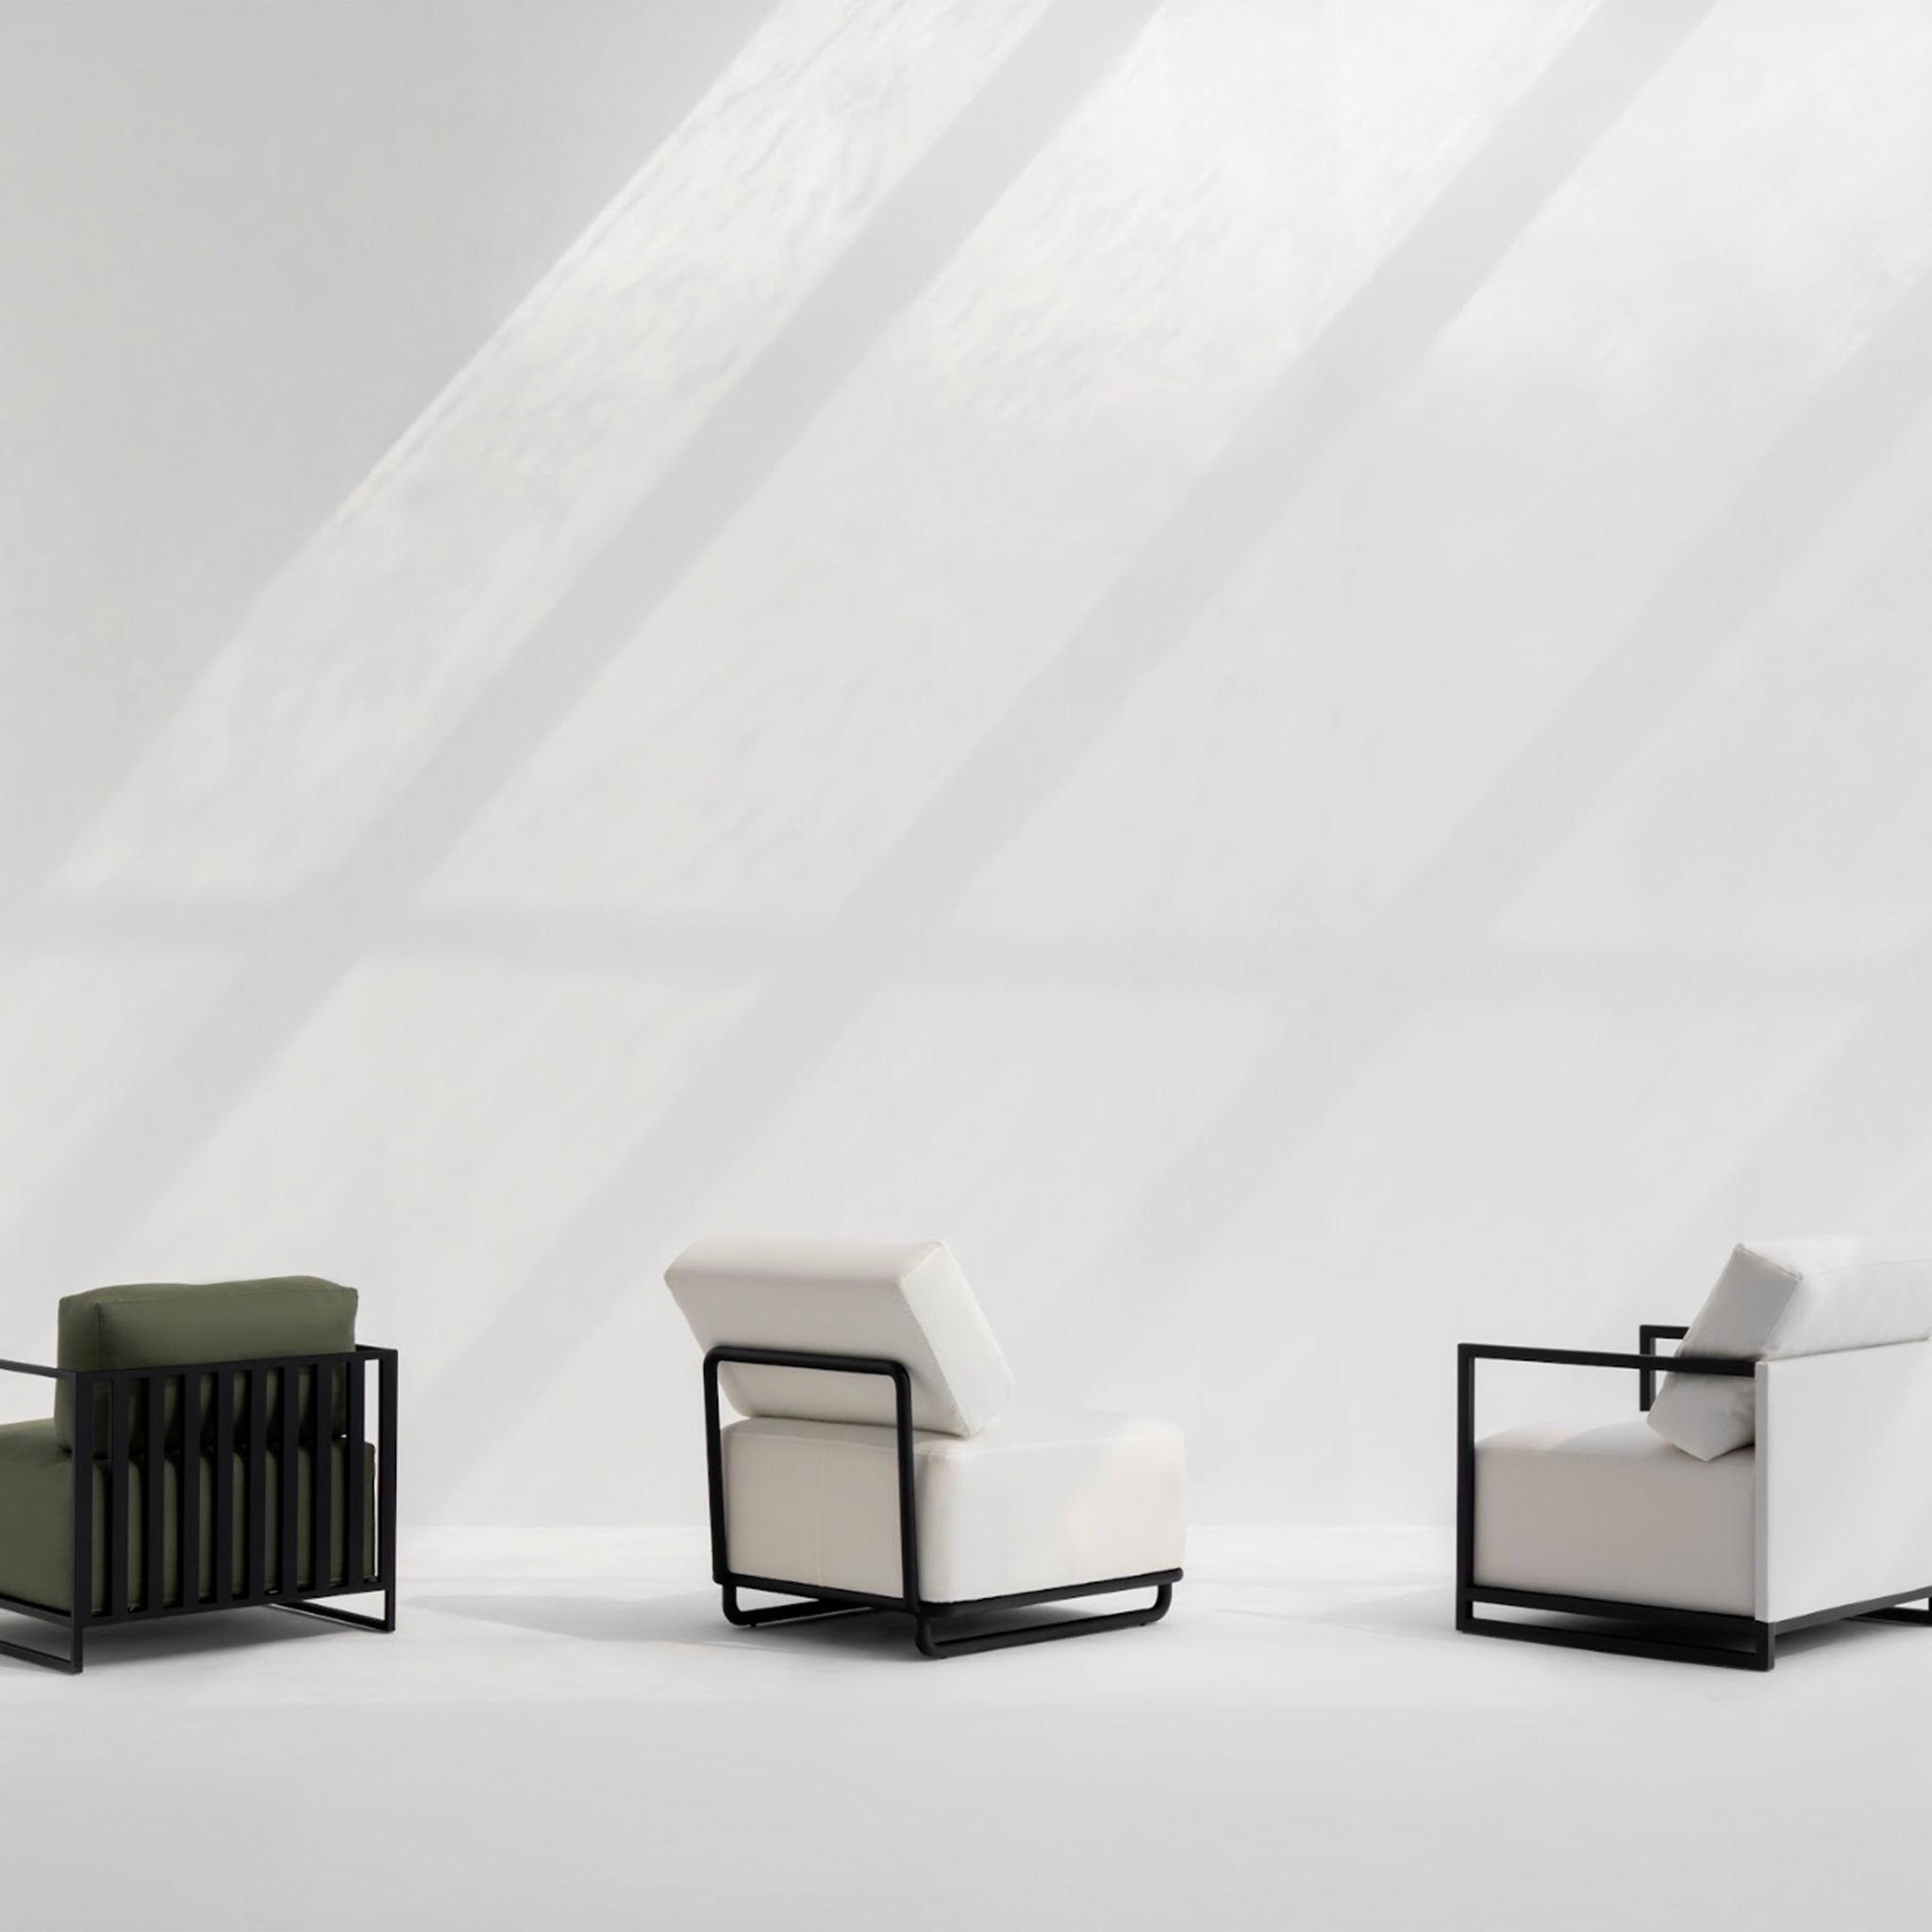 "Rear view of three Wyth Outdoor Accent Chairs in a minimalist setting, featuring green, white, and beige cushions with sleek black metal frames, illuminated by natural sunlight."